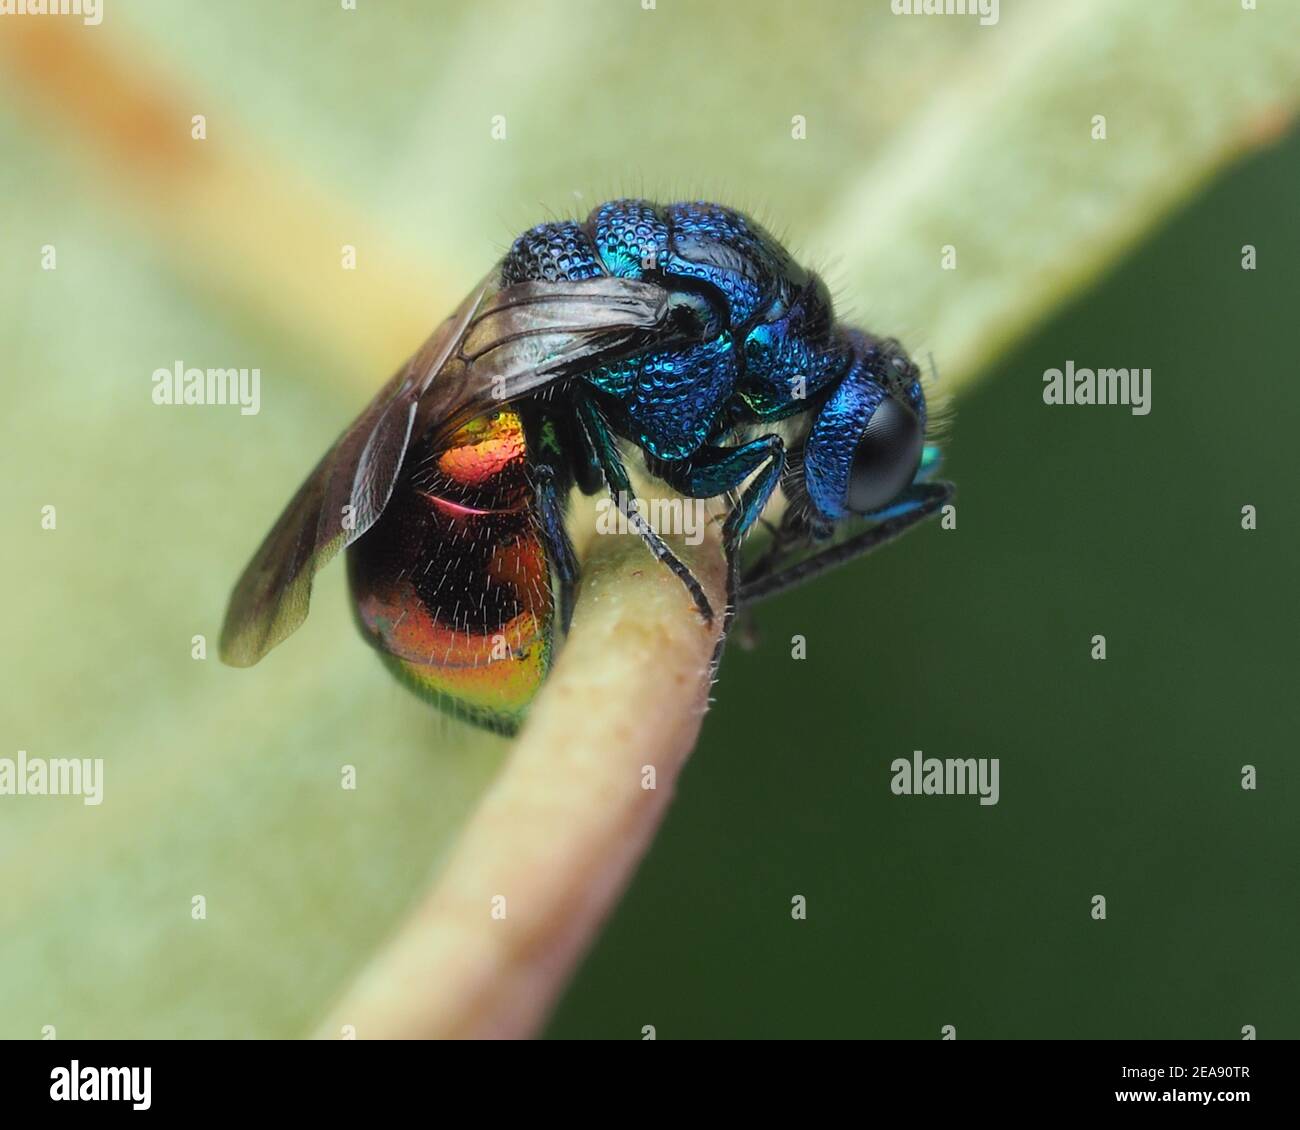 The Cuckoo Wasps – some of nature's artworks